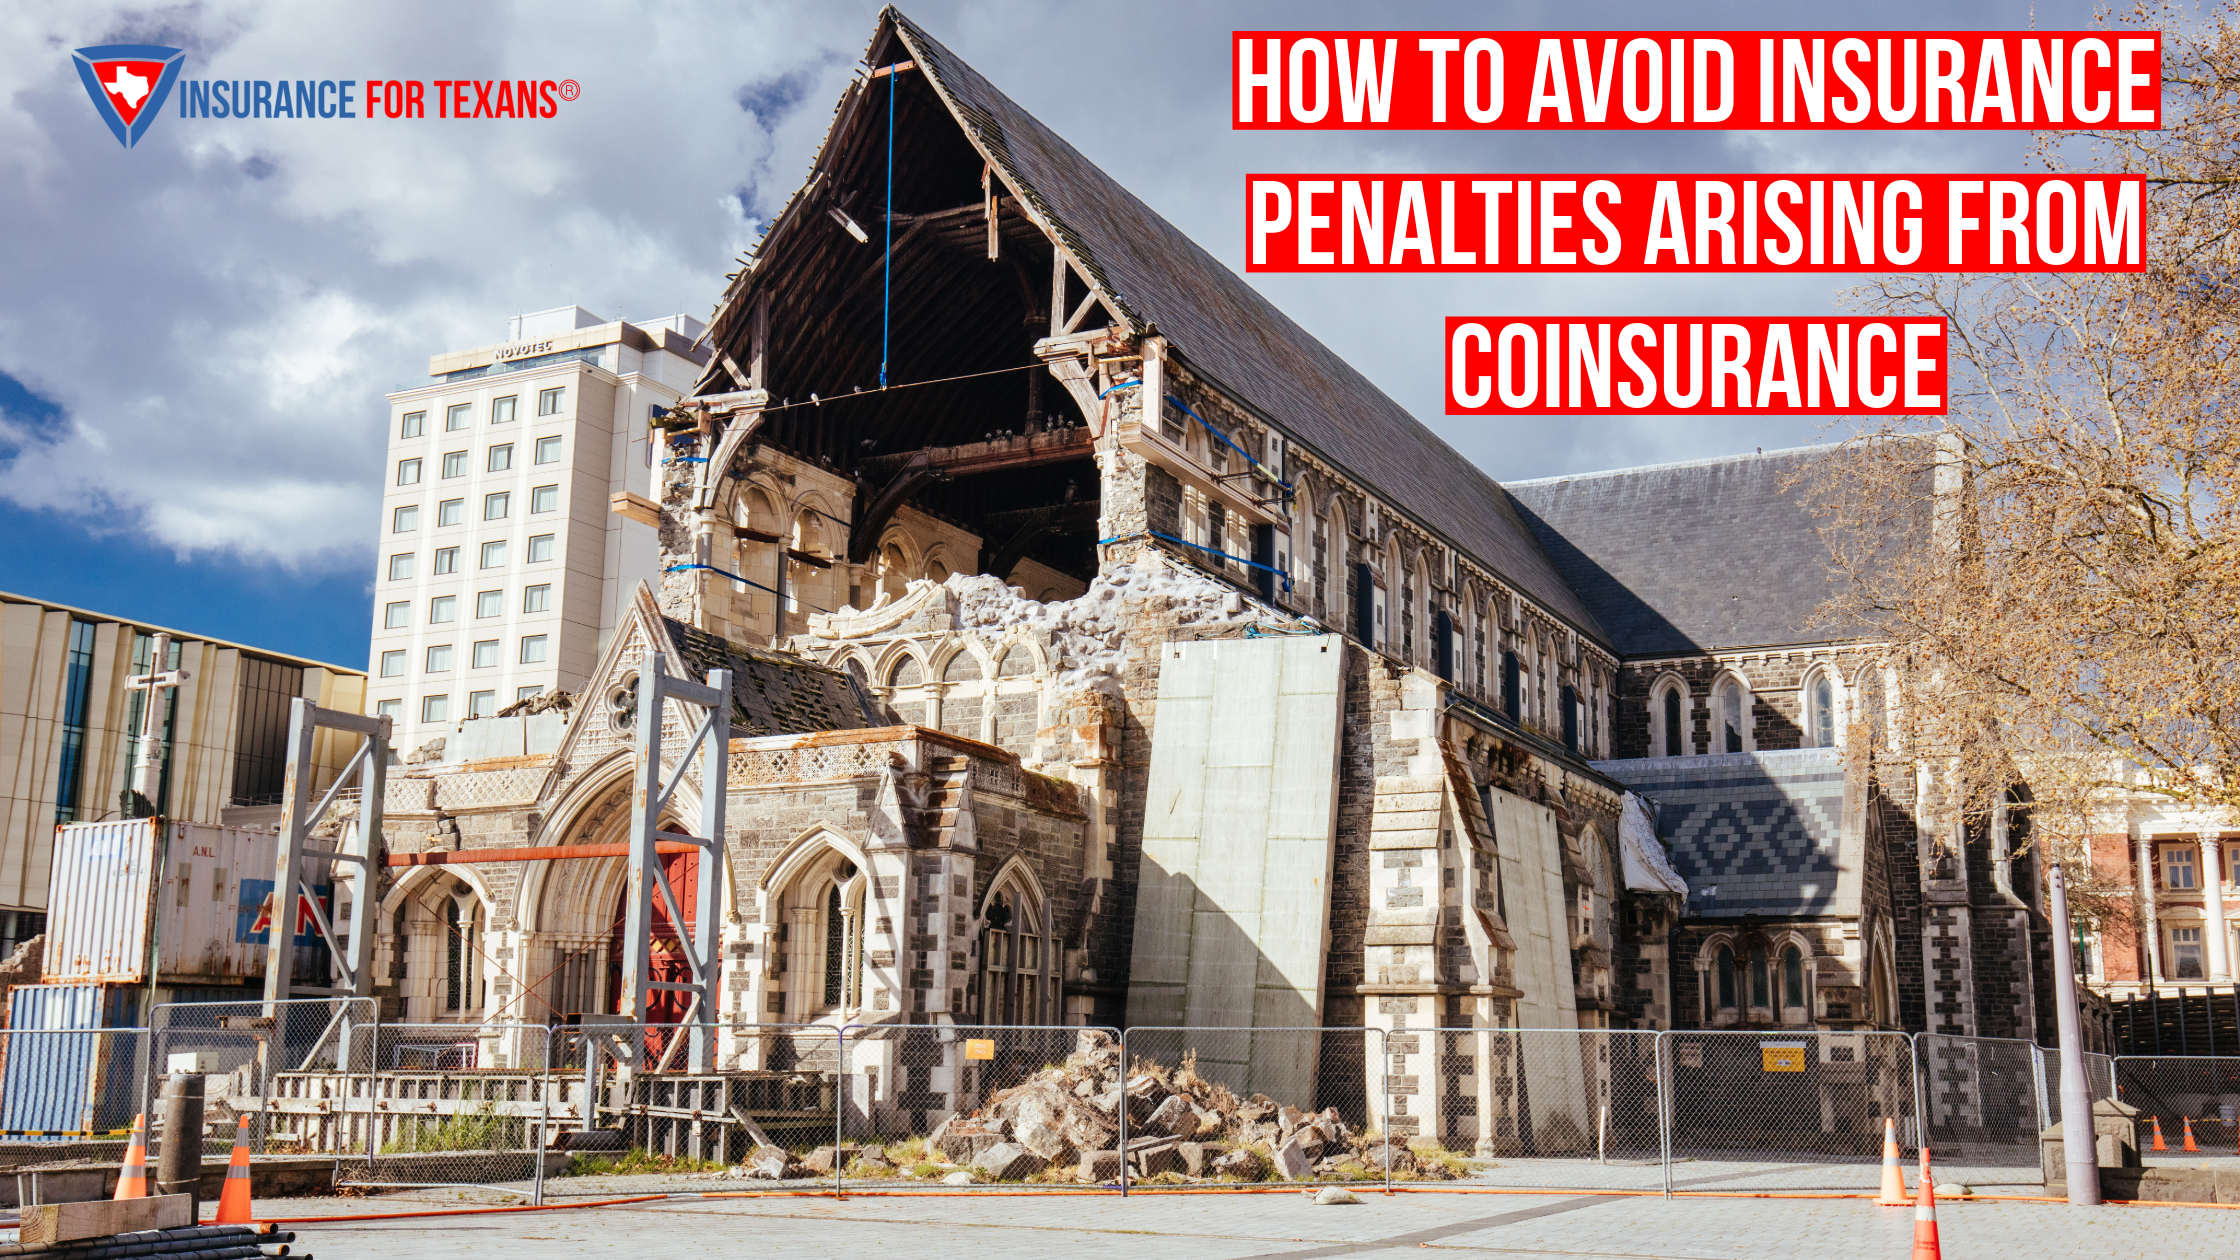 How To Avoid Insurance Penalties Arising From Coinsurance